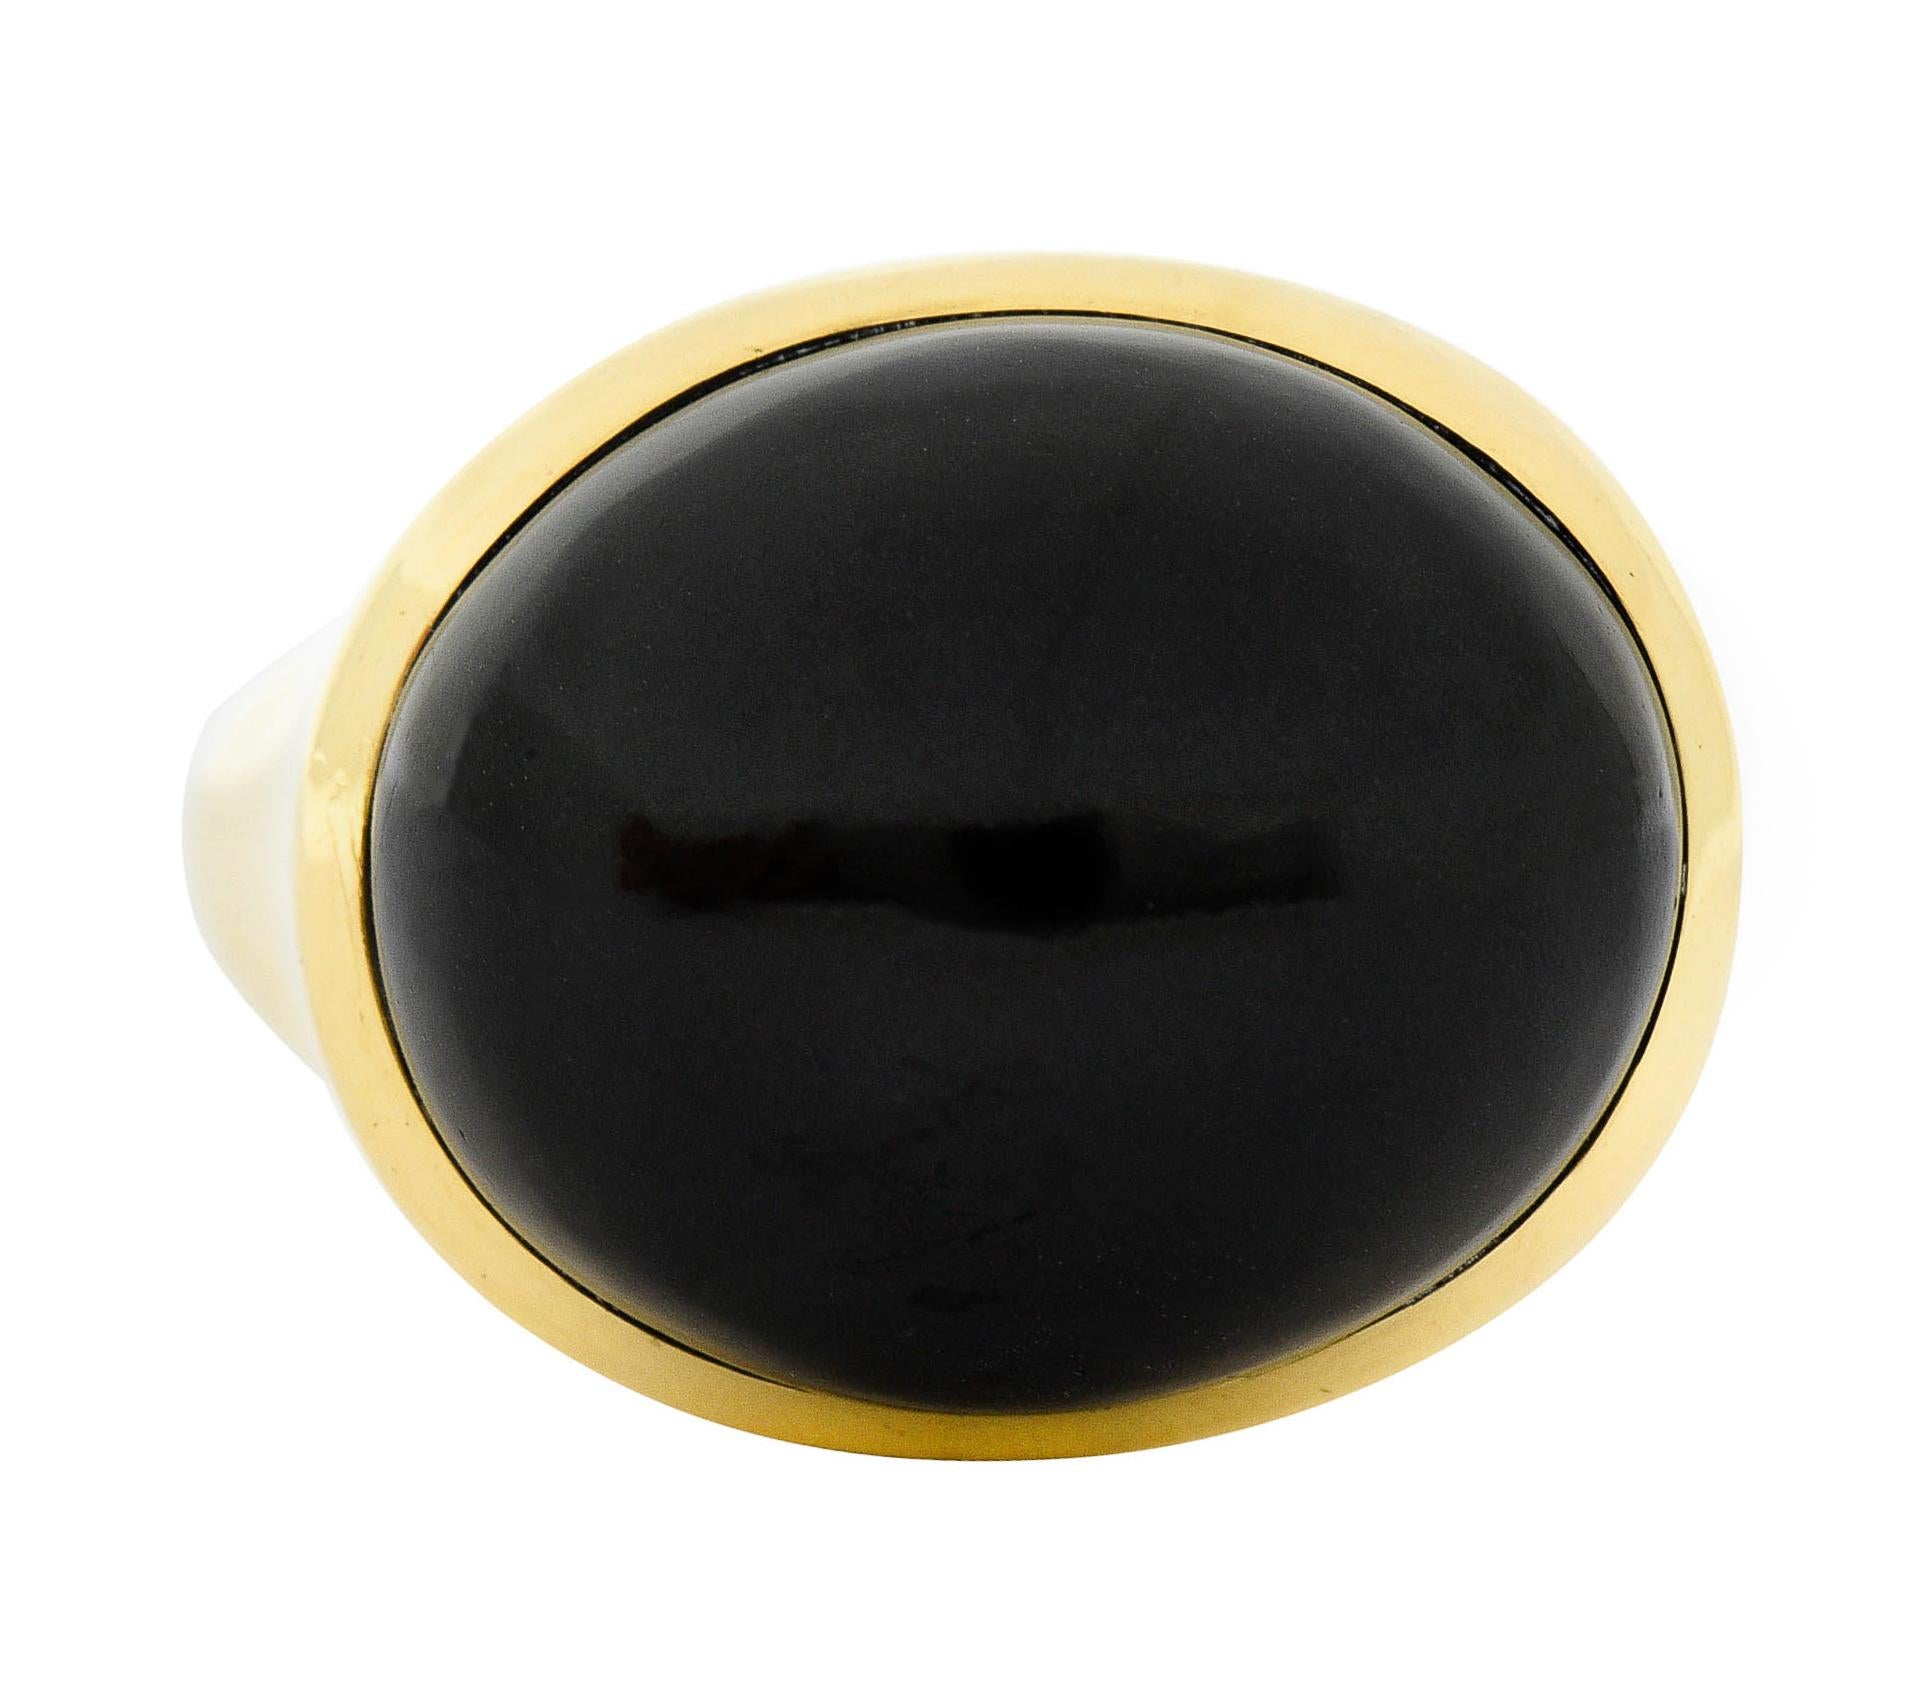 Centering an oval cut onyx cabochon measuring approximately 20.0 x 16.5 mm

Uniformly an opaque black with a very good polish

Bezel set in an undulating polished gold surround

Stamped 750 for 18 karat gold

Fully signed Elsa Peretti Tiffany & Co.